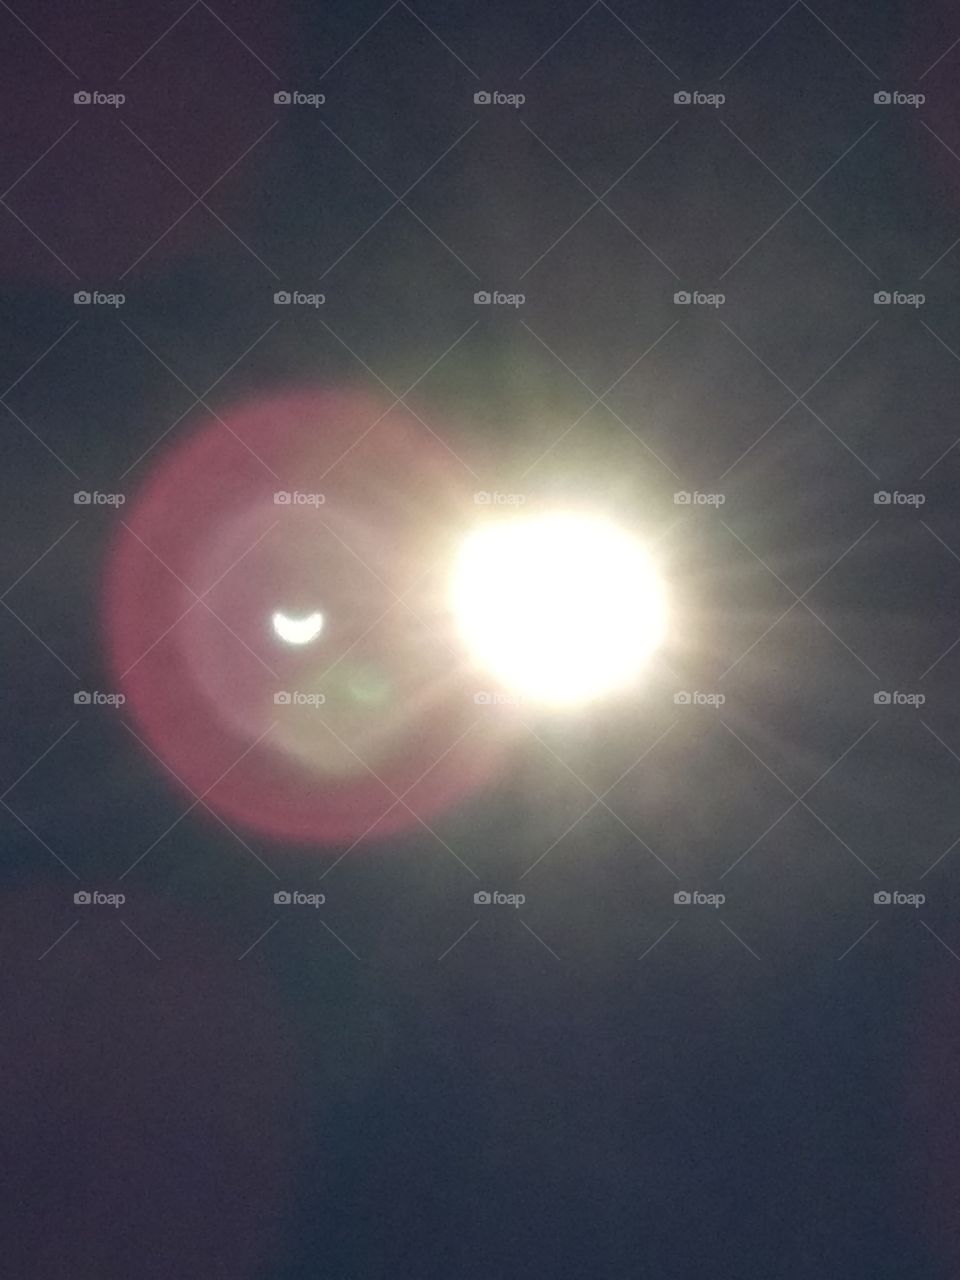 eclipse reflection 2017